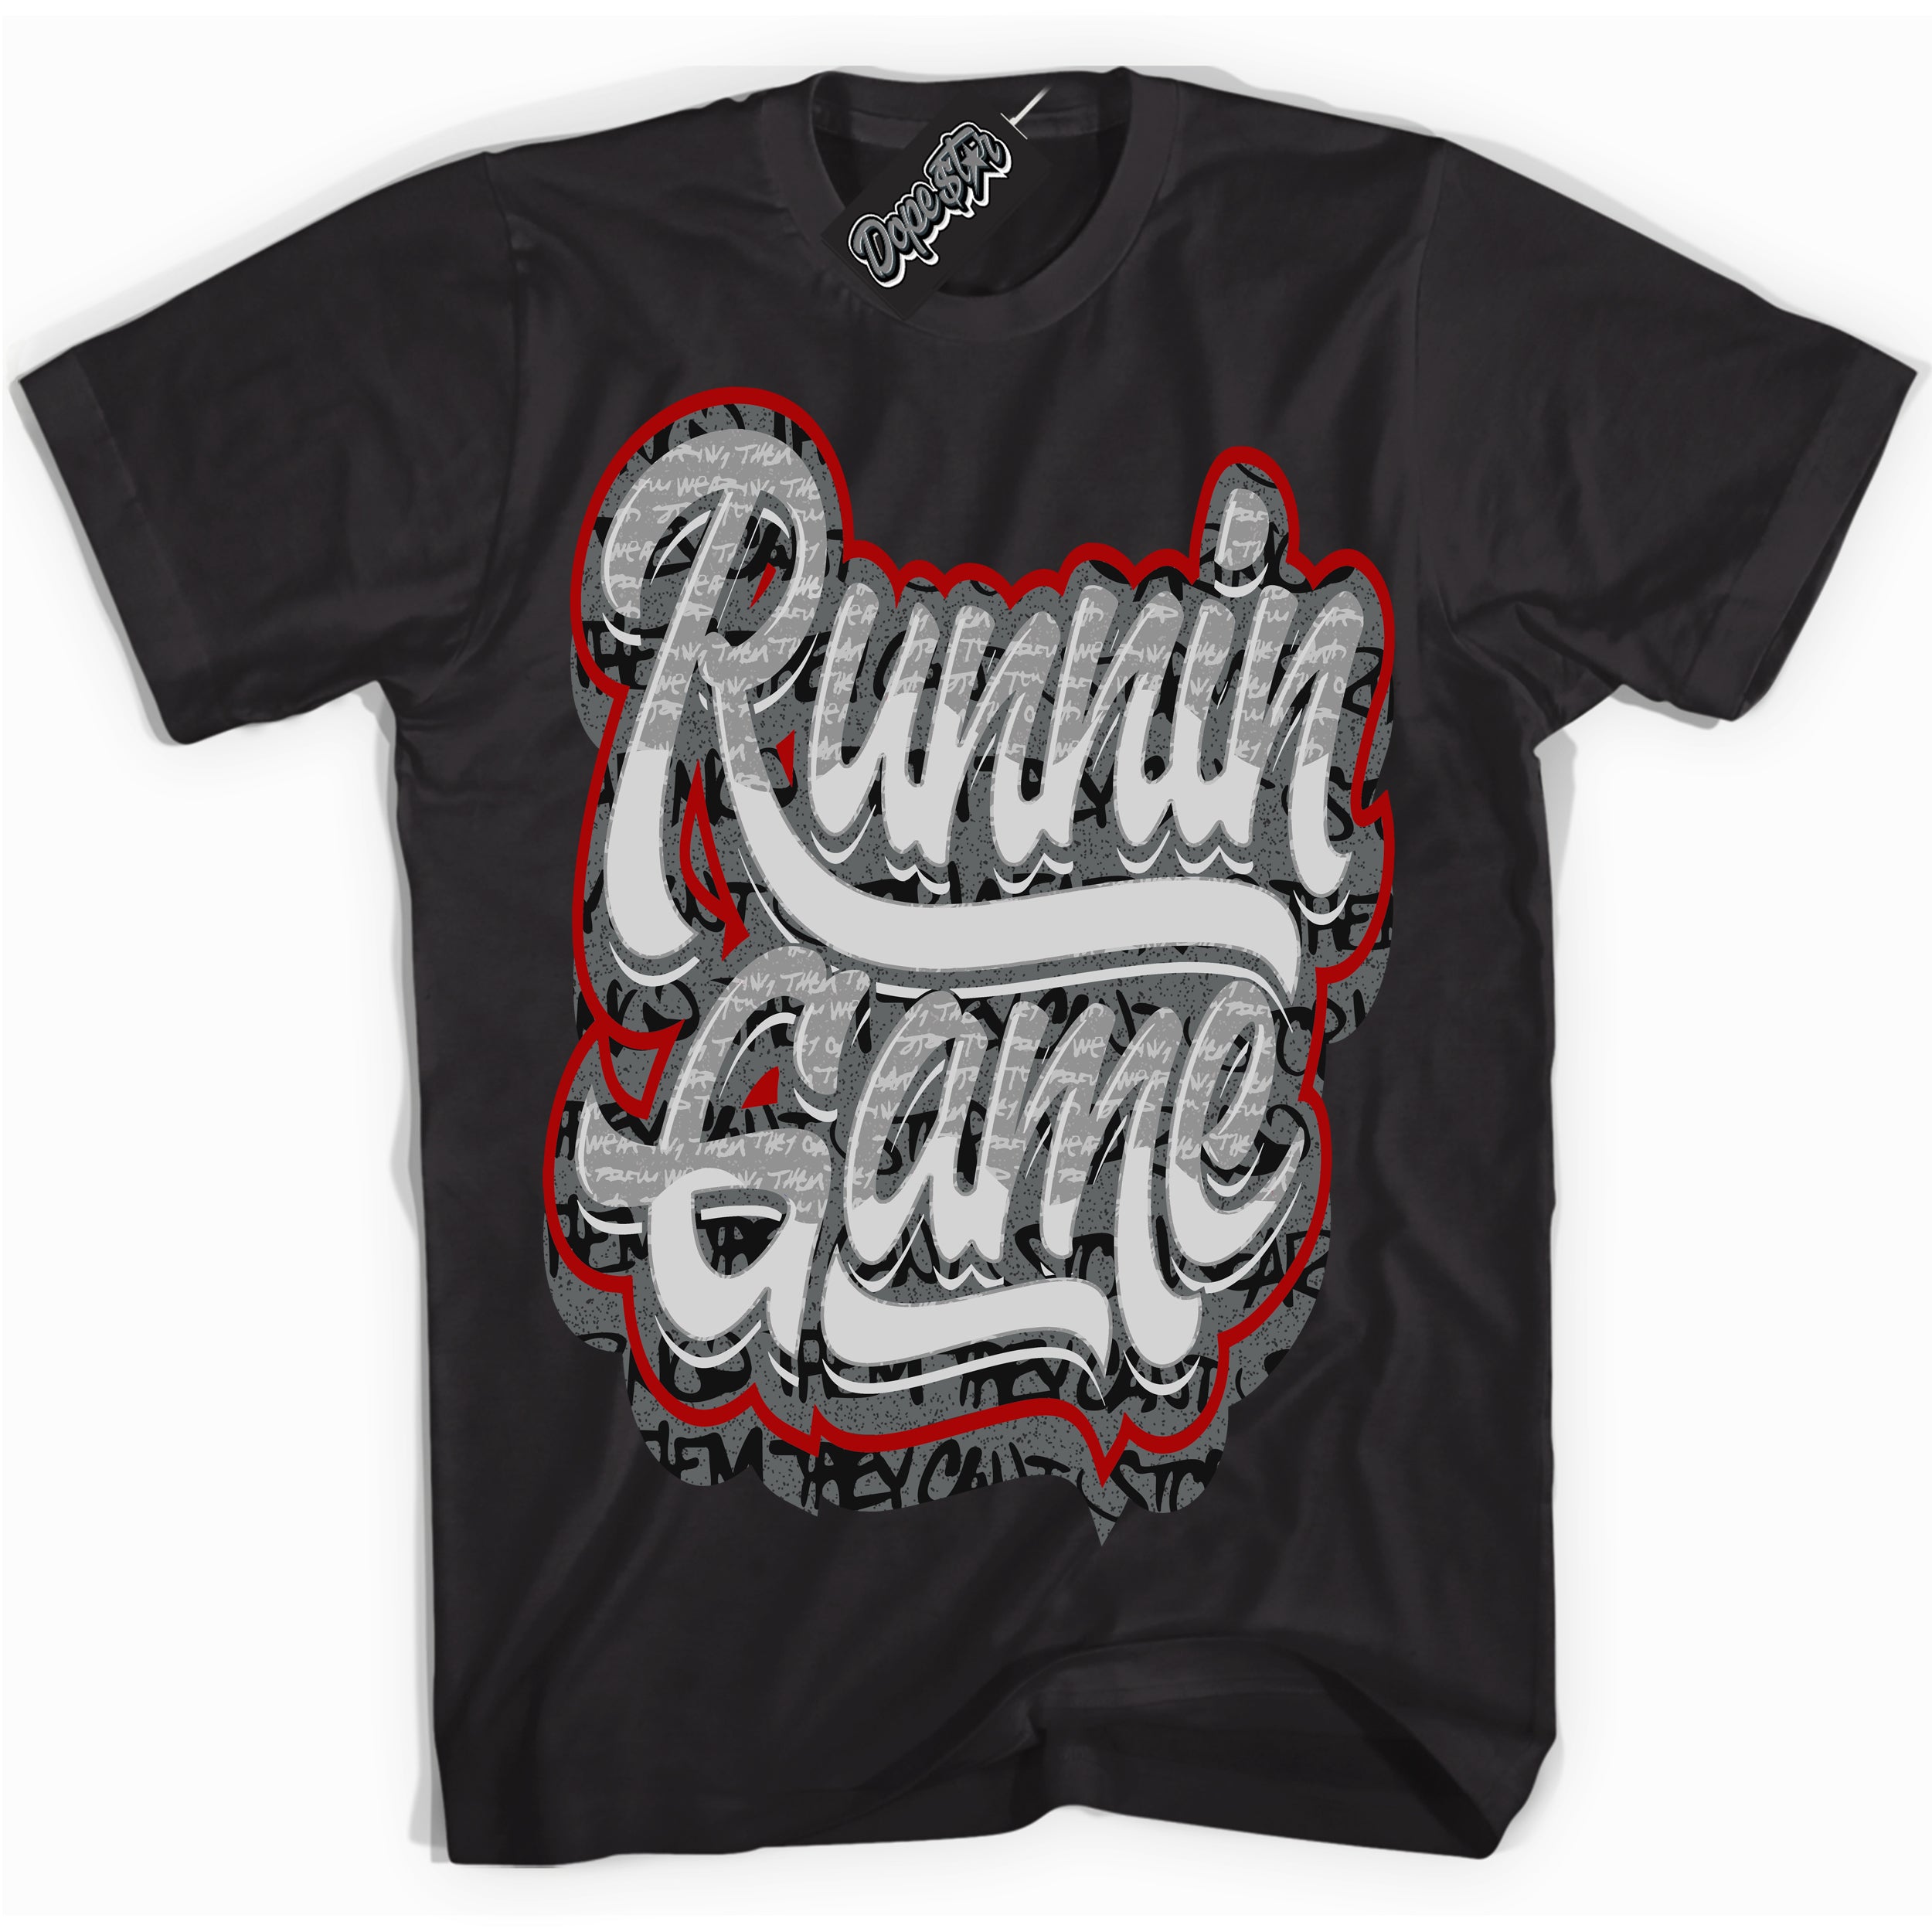 Cool Black Shirt with “ Running Game ” design that perfectly matches Rebellionaire 1s Sneakers.